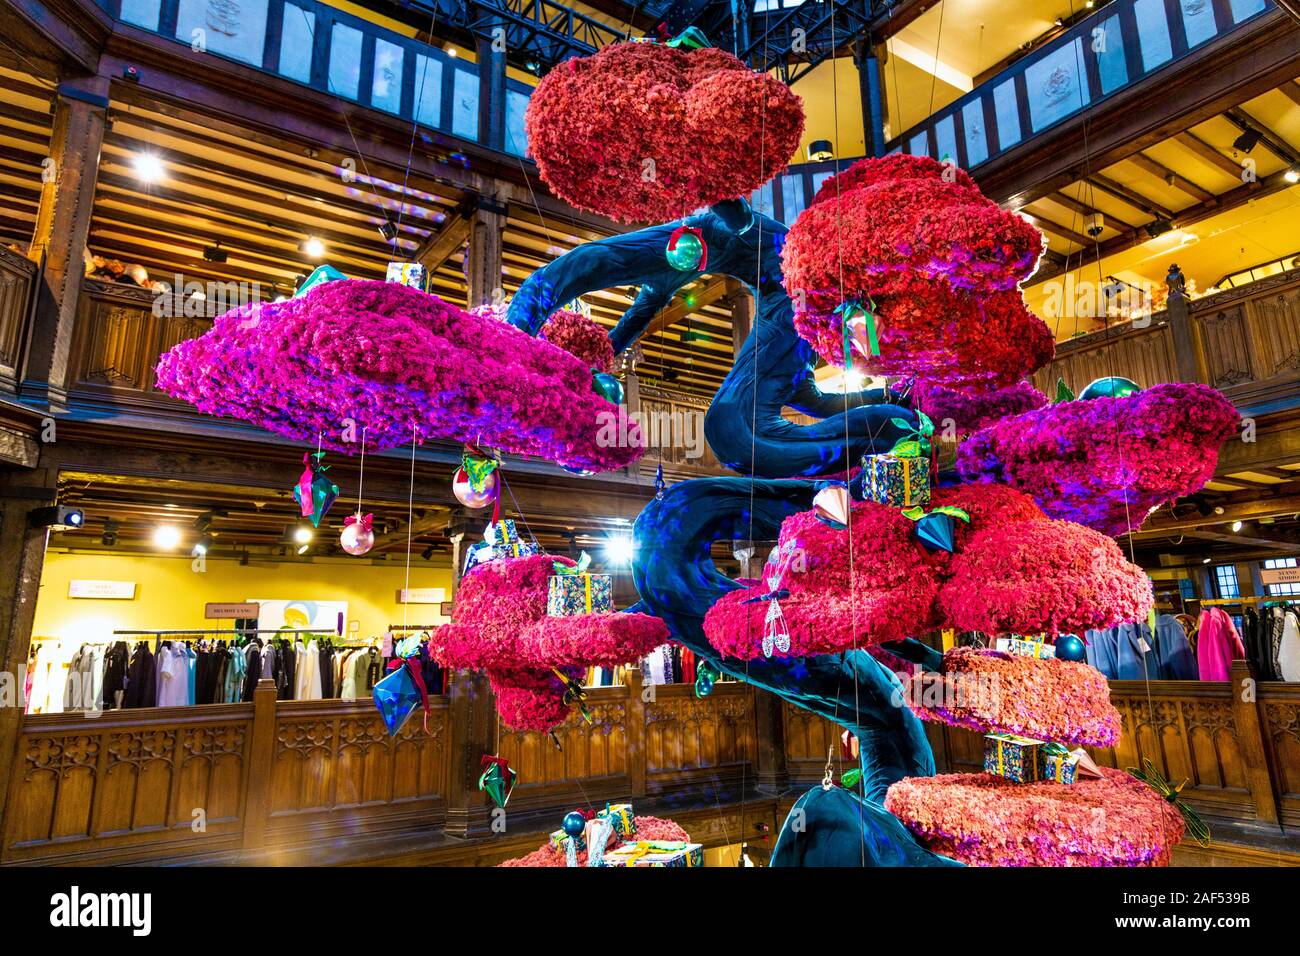 A large Christmas tree in a Japanese bonsai style made of reindeer moss suspended from the ceiling at Liberty London, UK Stock Photo